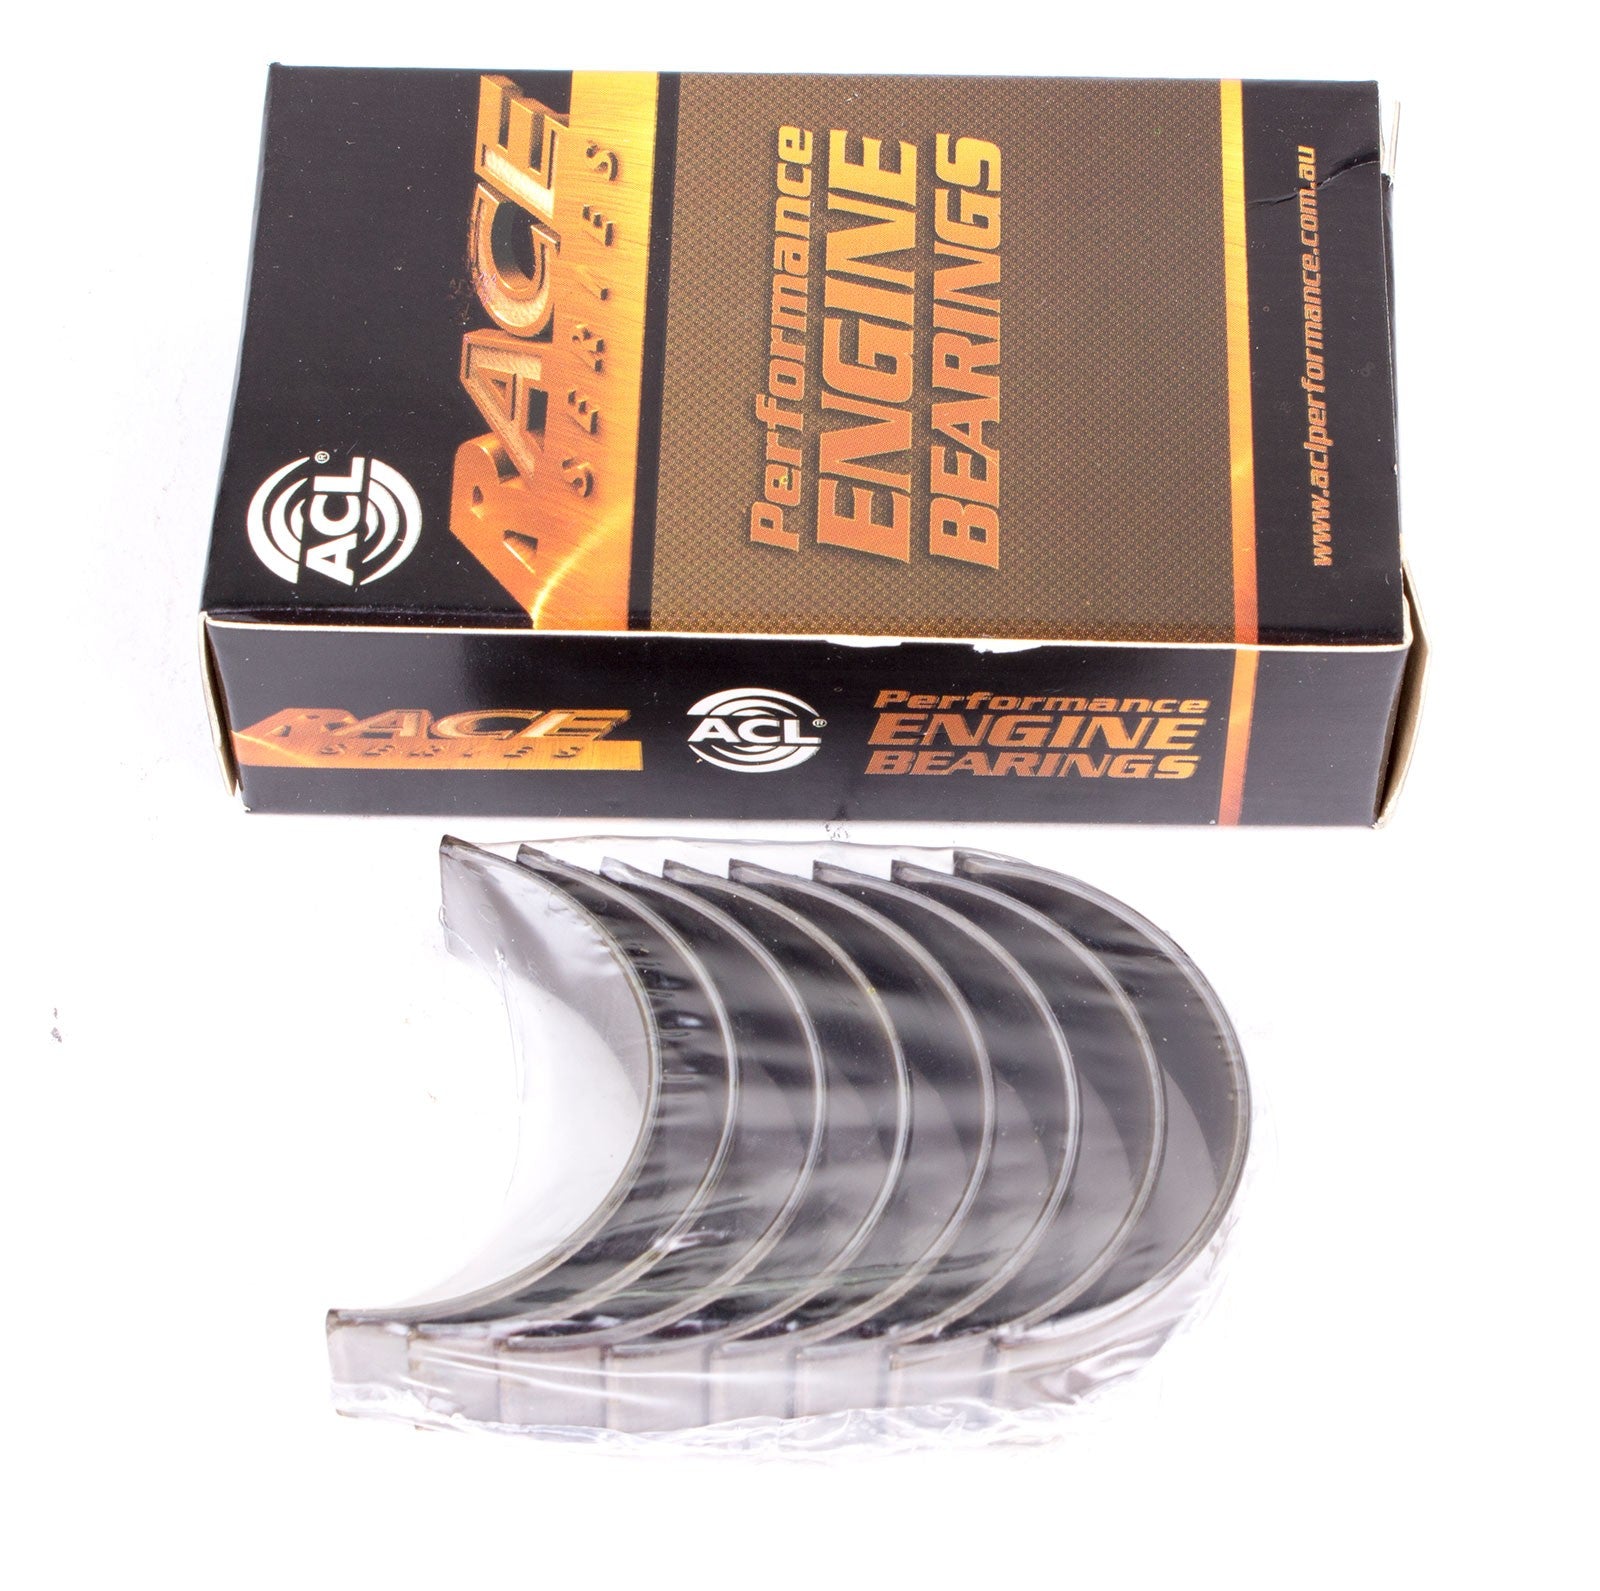 ACL 7M2384H-020 Main bearing set (ACL Race Series) Photo-0 